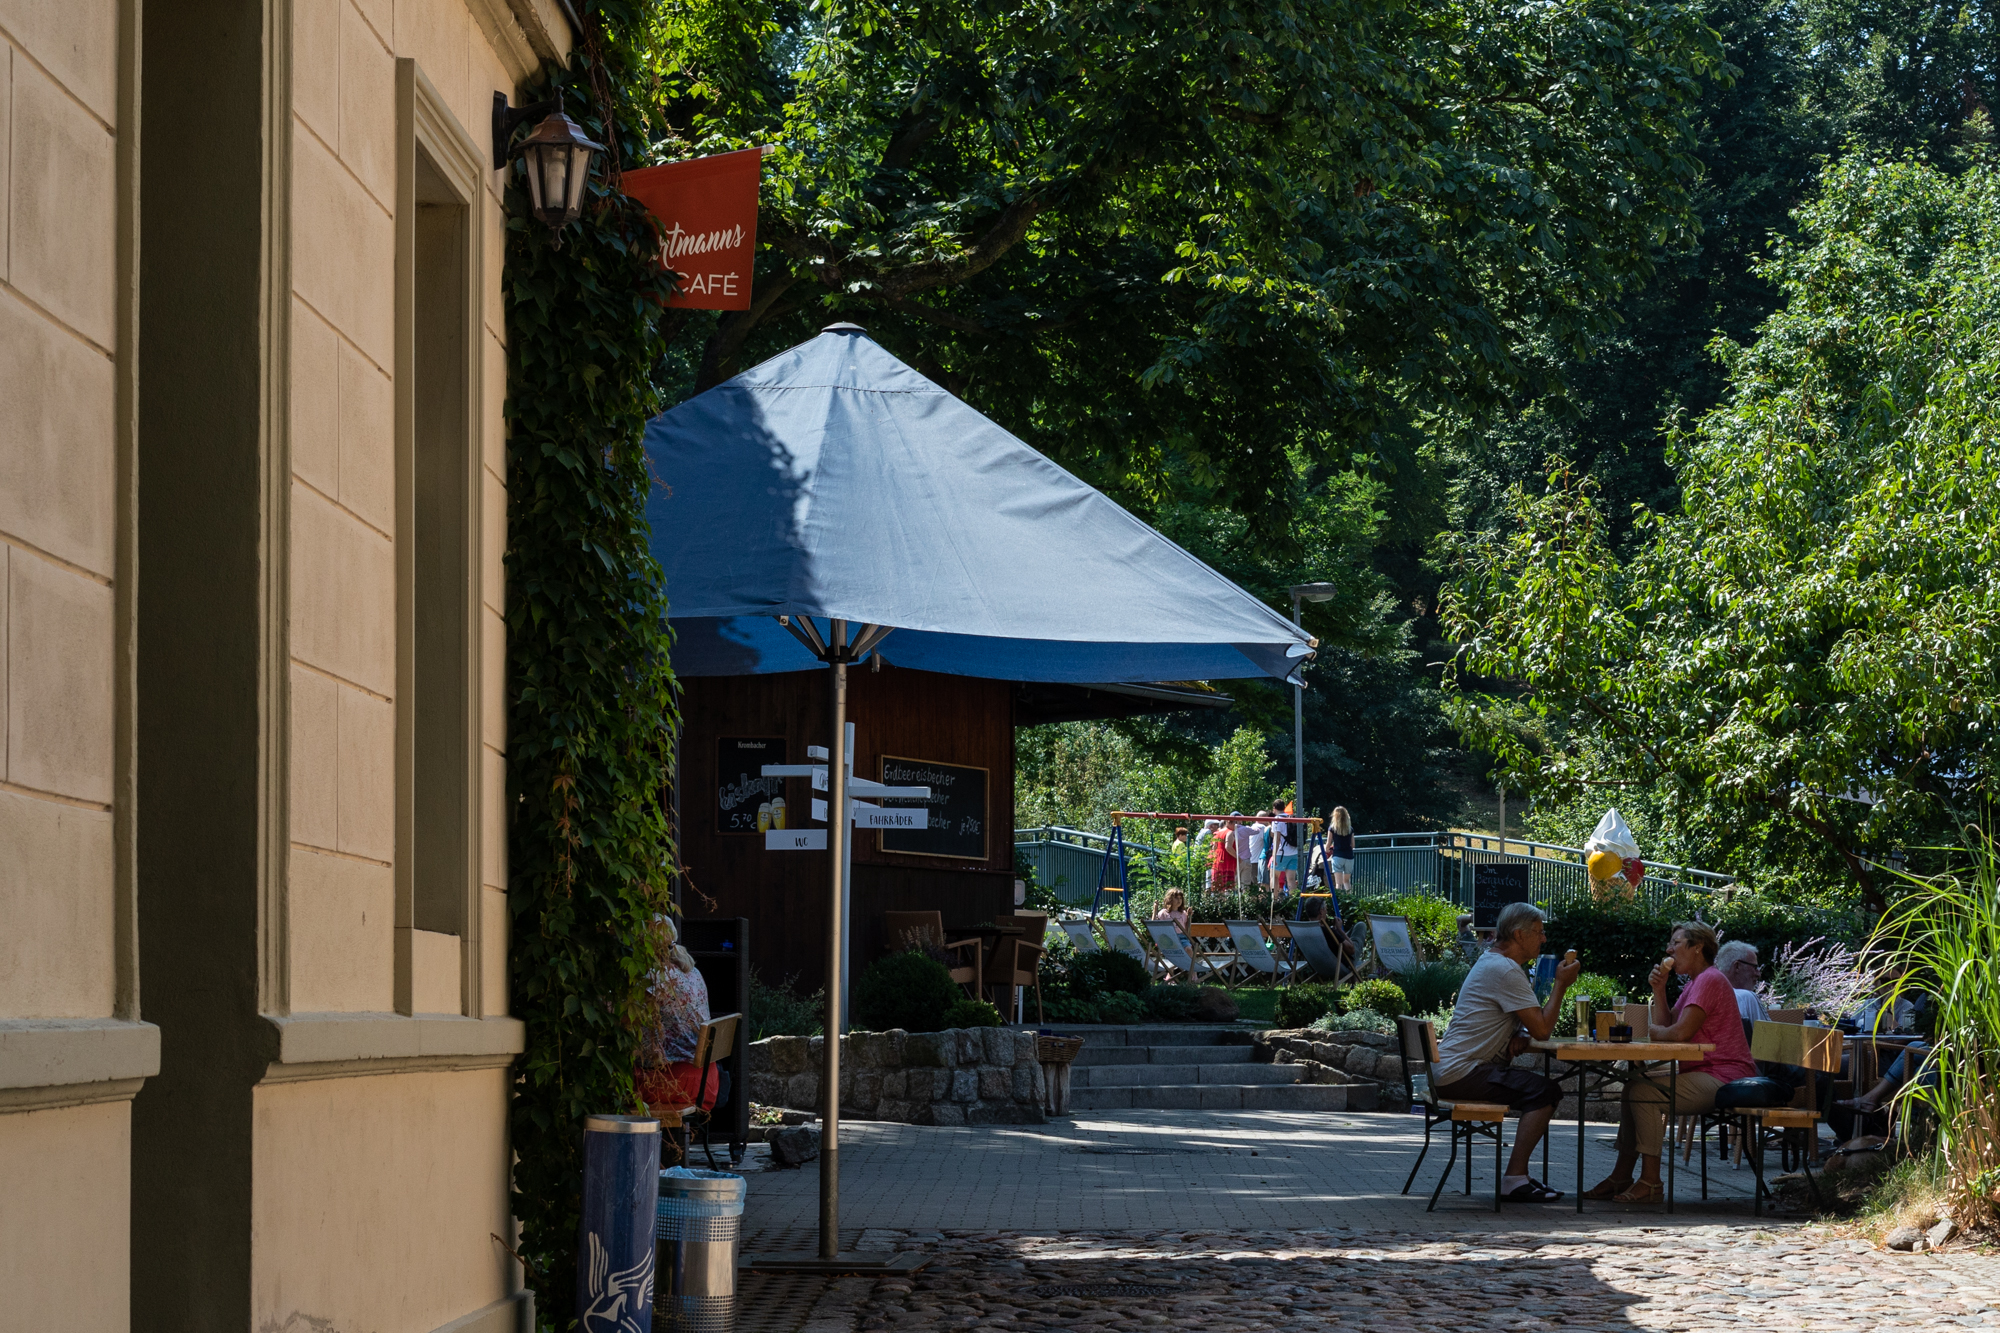 Wartmann’s Eiscafe in Klein Glienicke - a former East German enclave separated from West Berlin by the Berlin Wall and only accessible with special permission